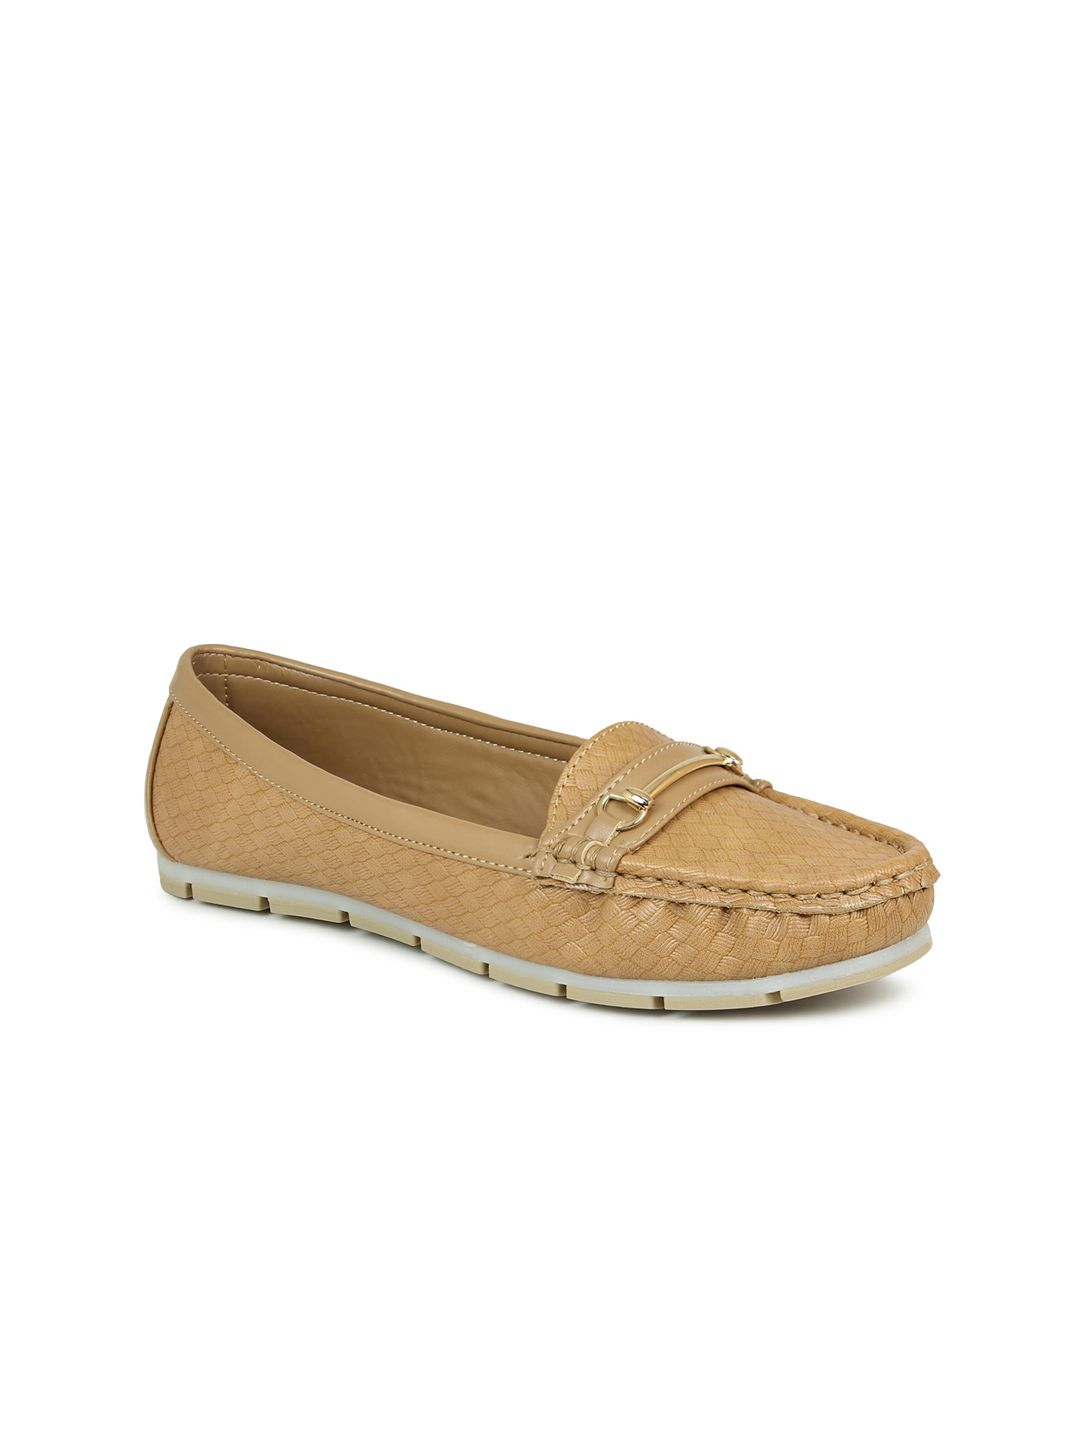 Inc 5 Women Solid Loafers Price in India